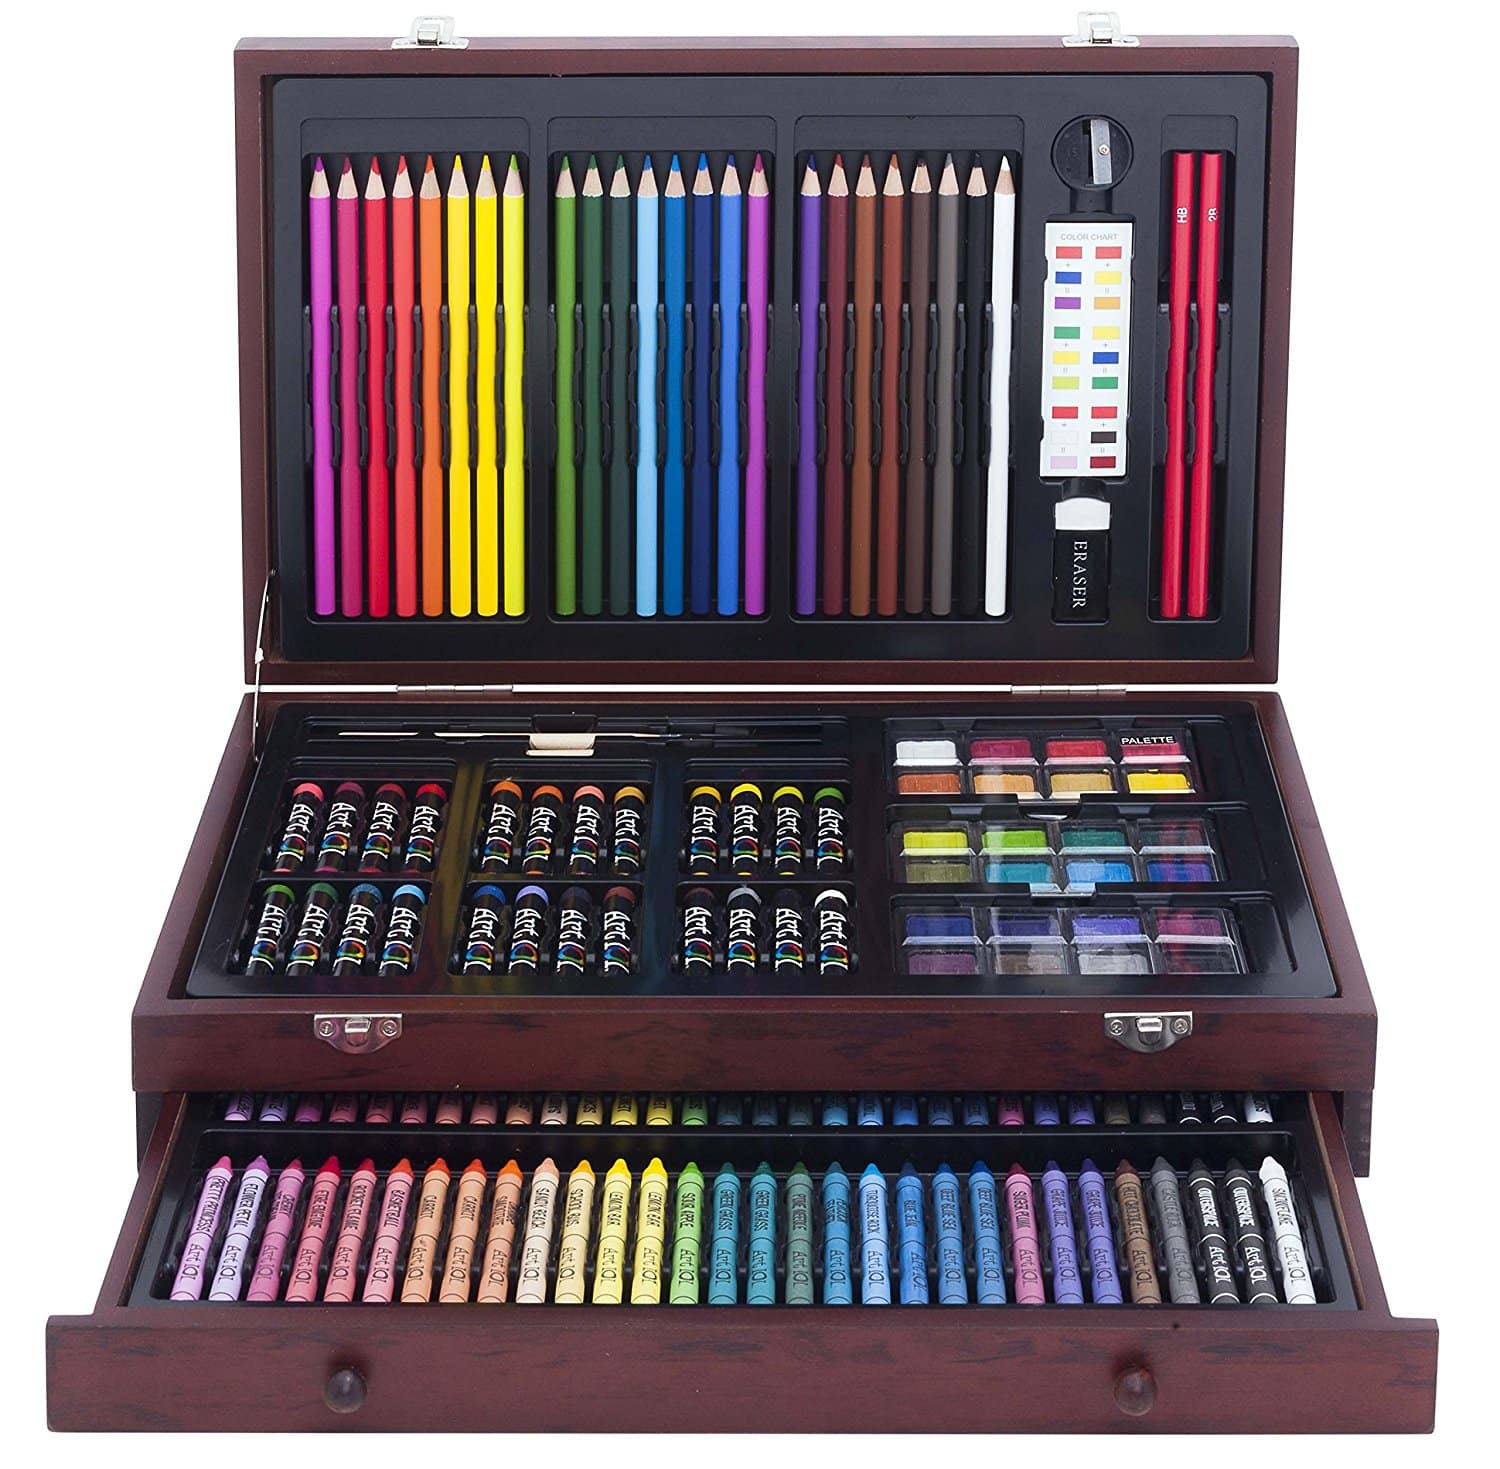 Top 10 Best Finest Art Sets in 2022 - TopTenTheBest